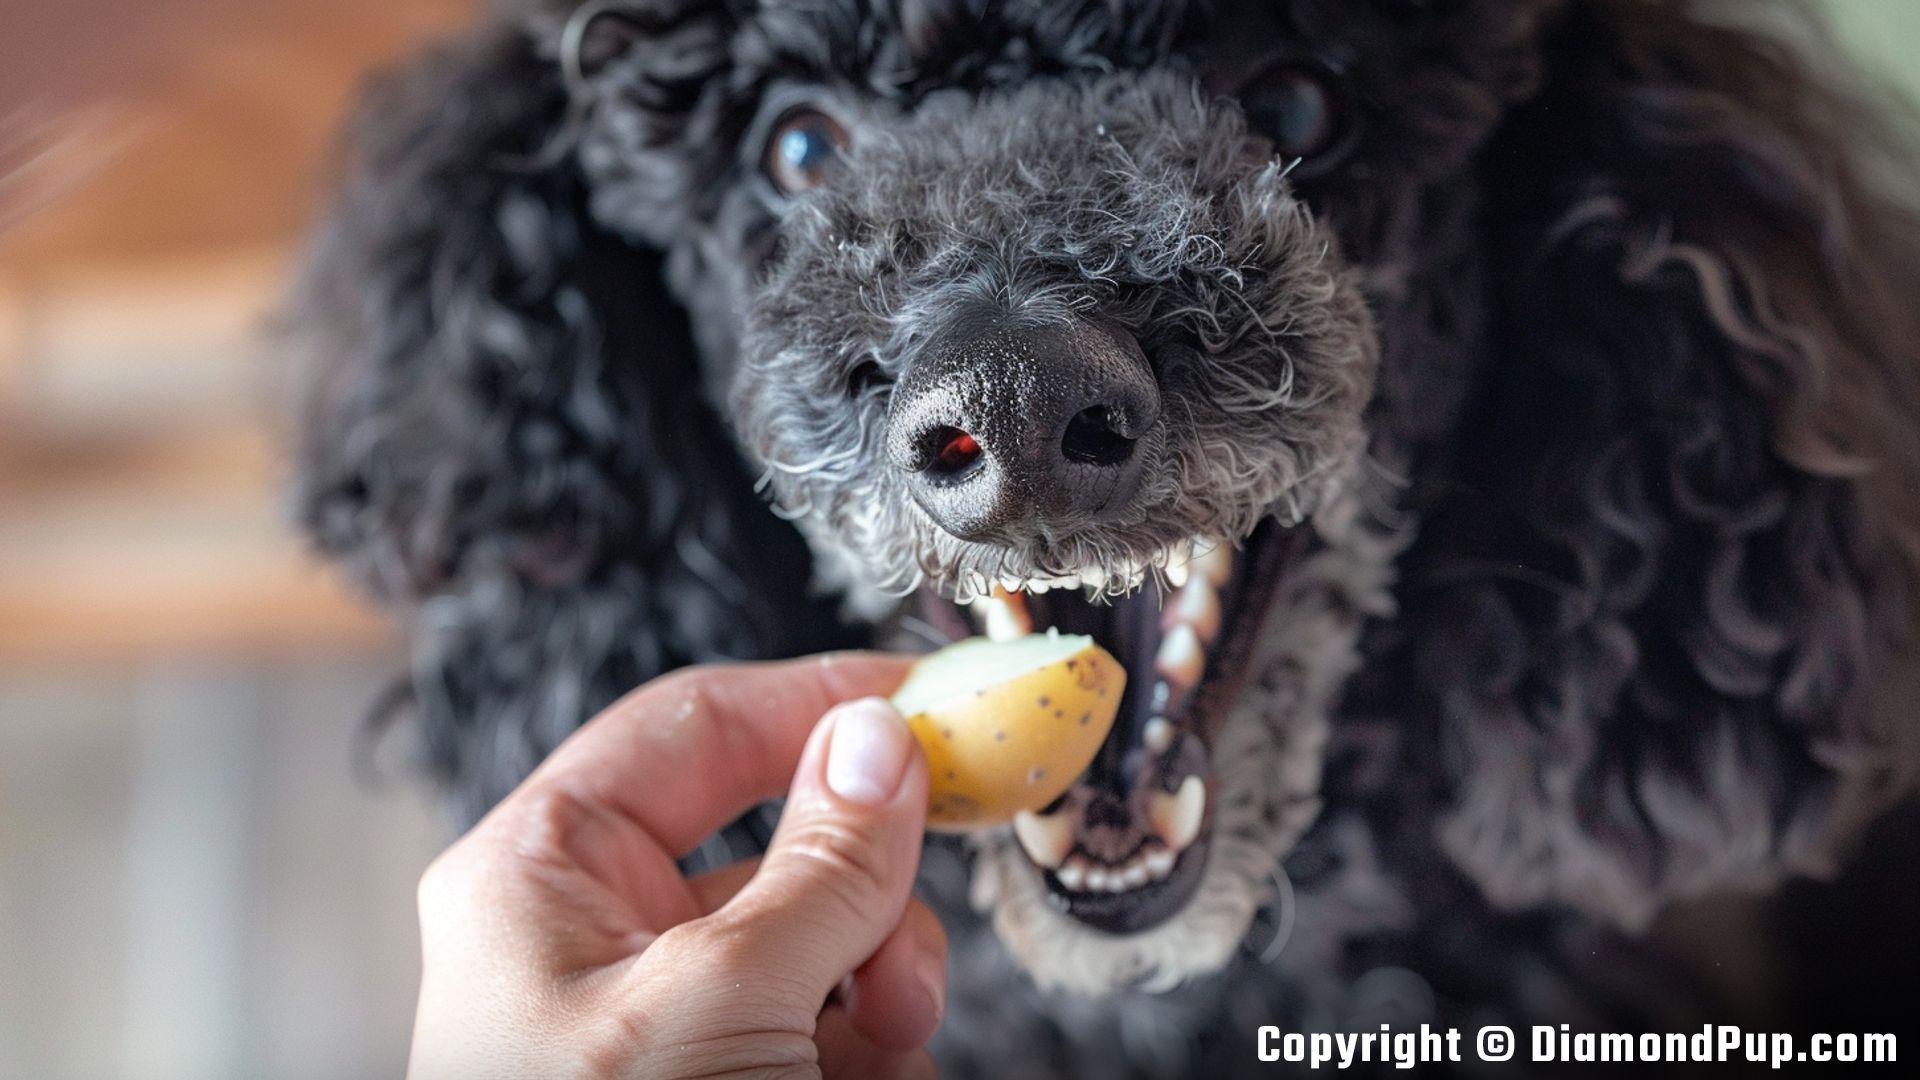 Photograph of a Happy Poodle Snacking on Potato